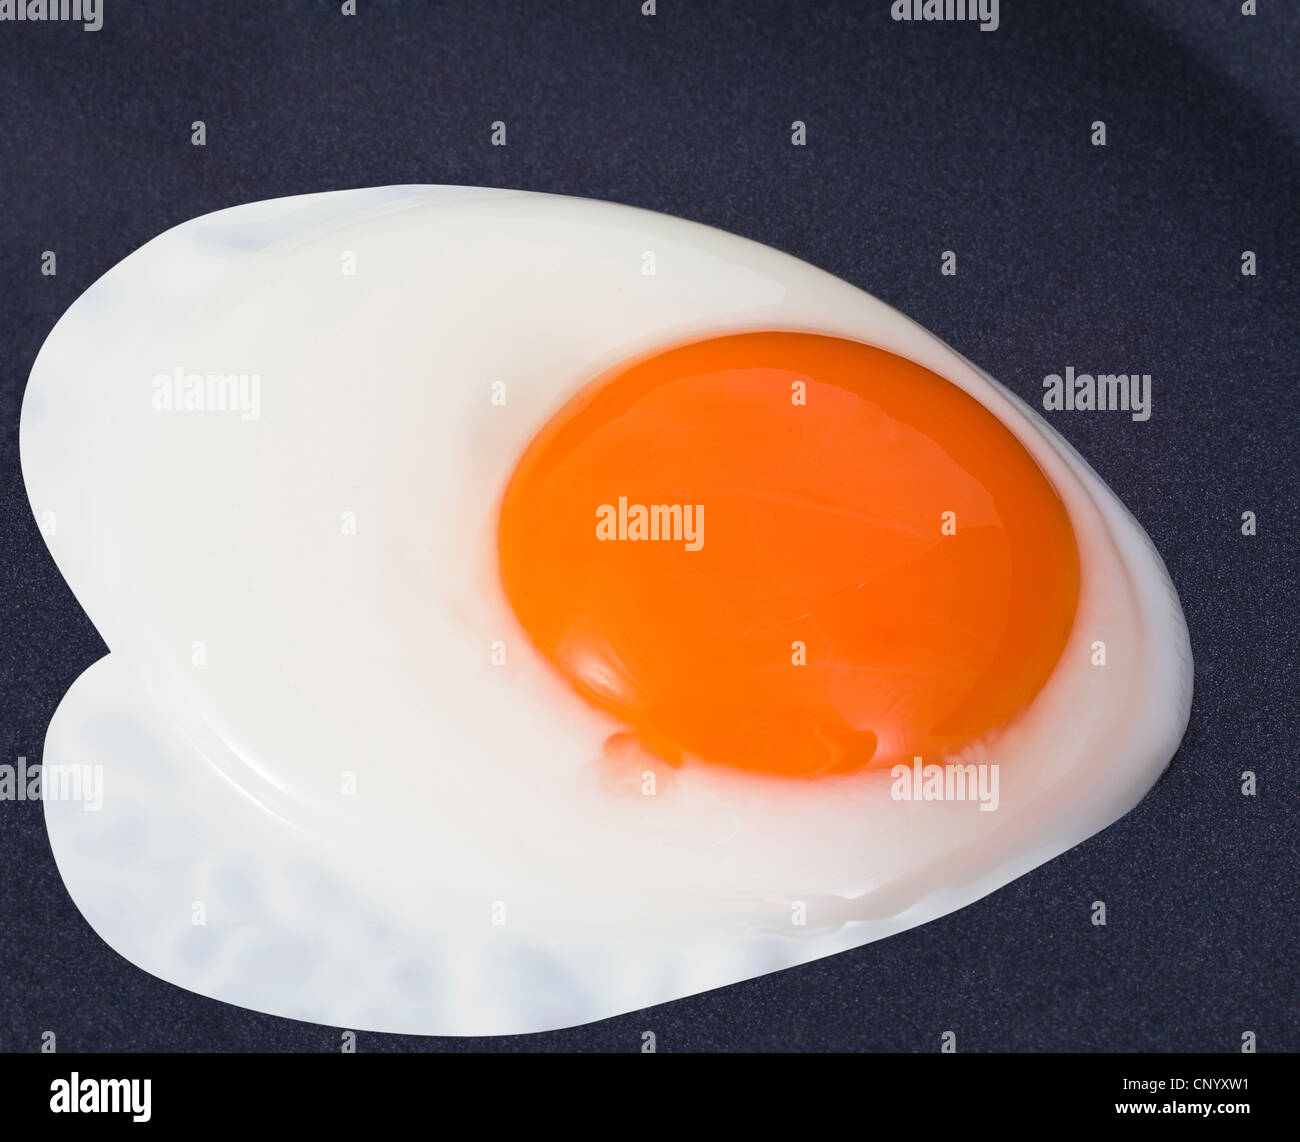 view of the Fried Egg on black pan Stock Photo